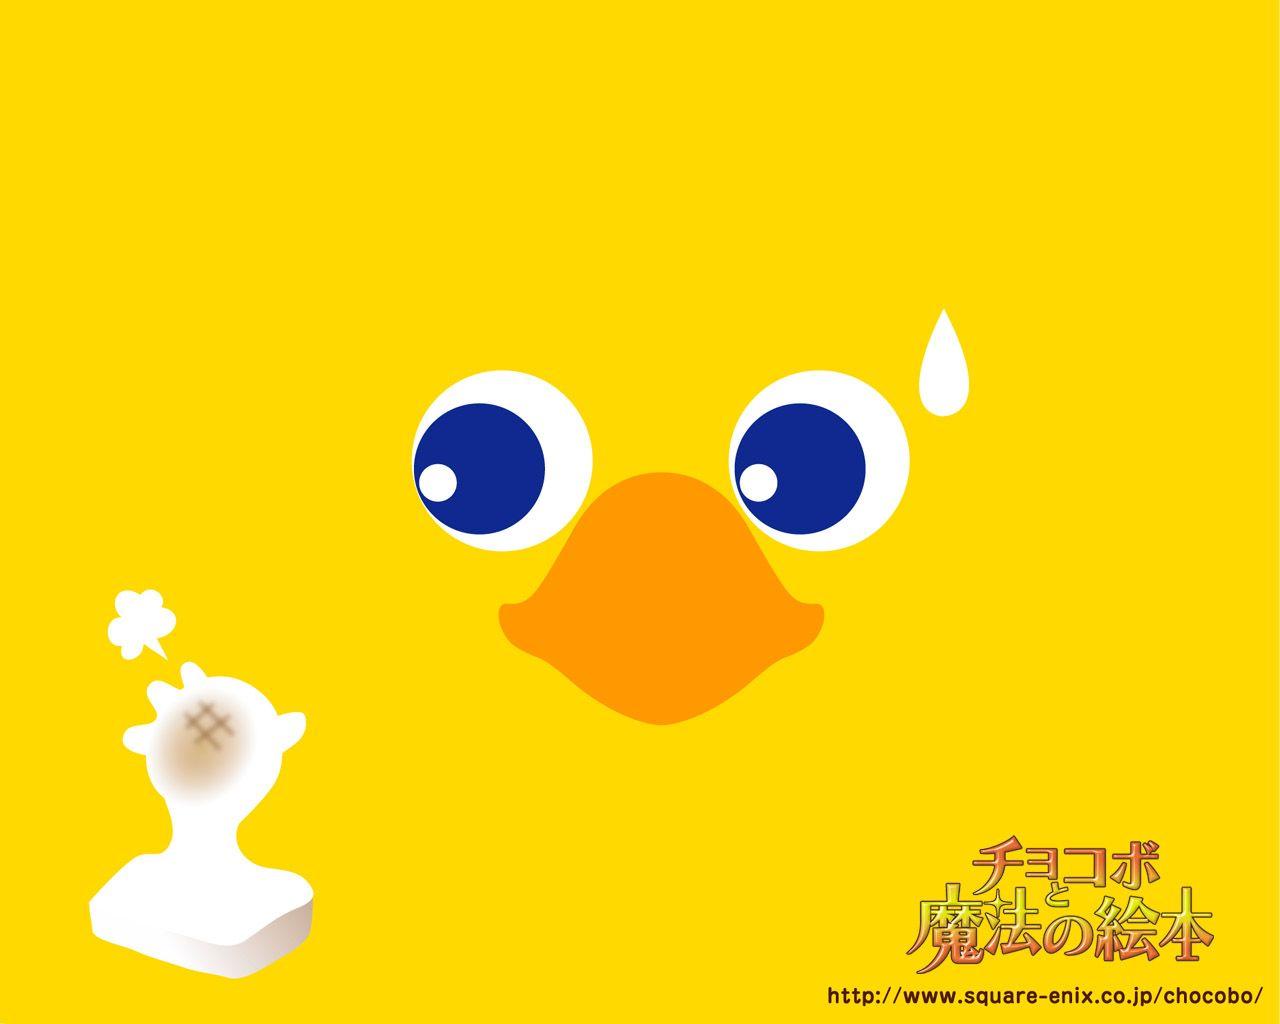 Free Download Chocobo Wallpapers 1280x1024 For Your Desktop Mobile Tablet Explore 72 Chocobo Wallpaper Chocobo Wallpaper